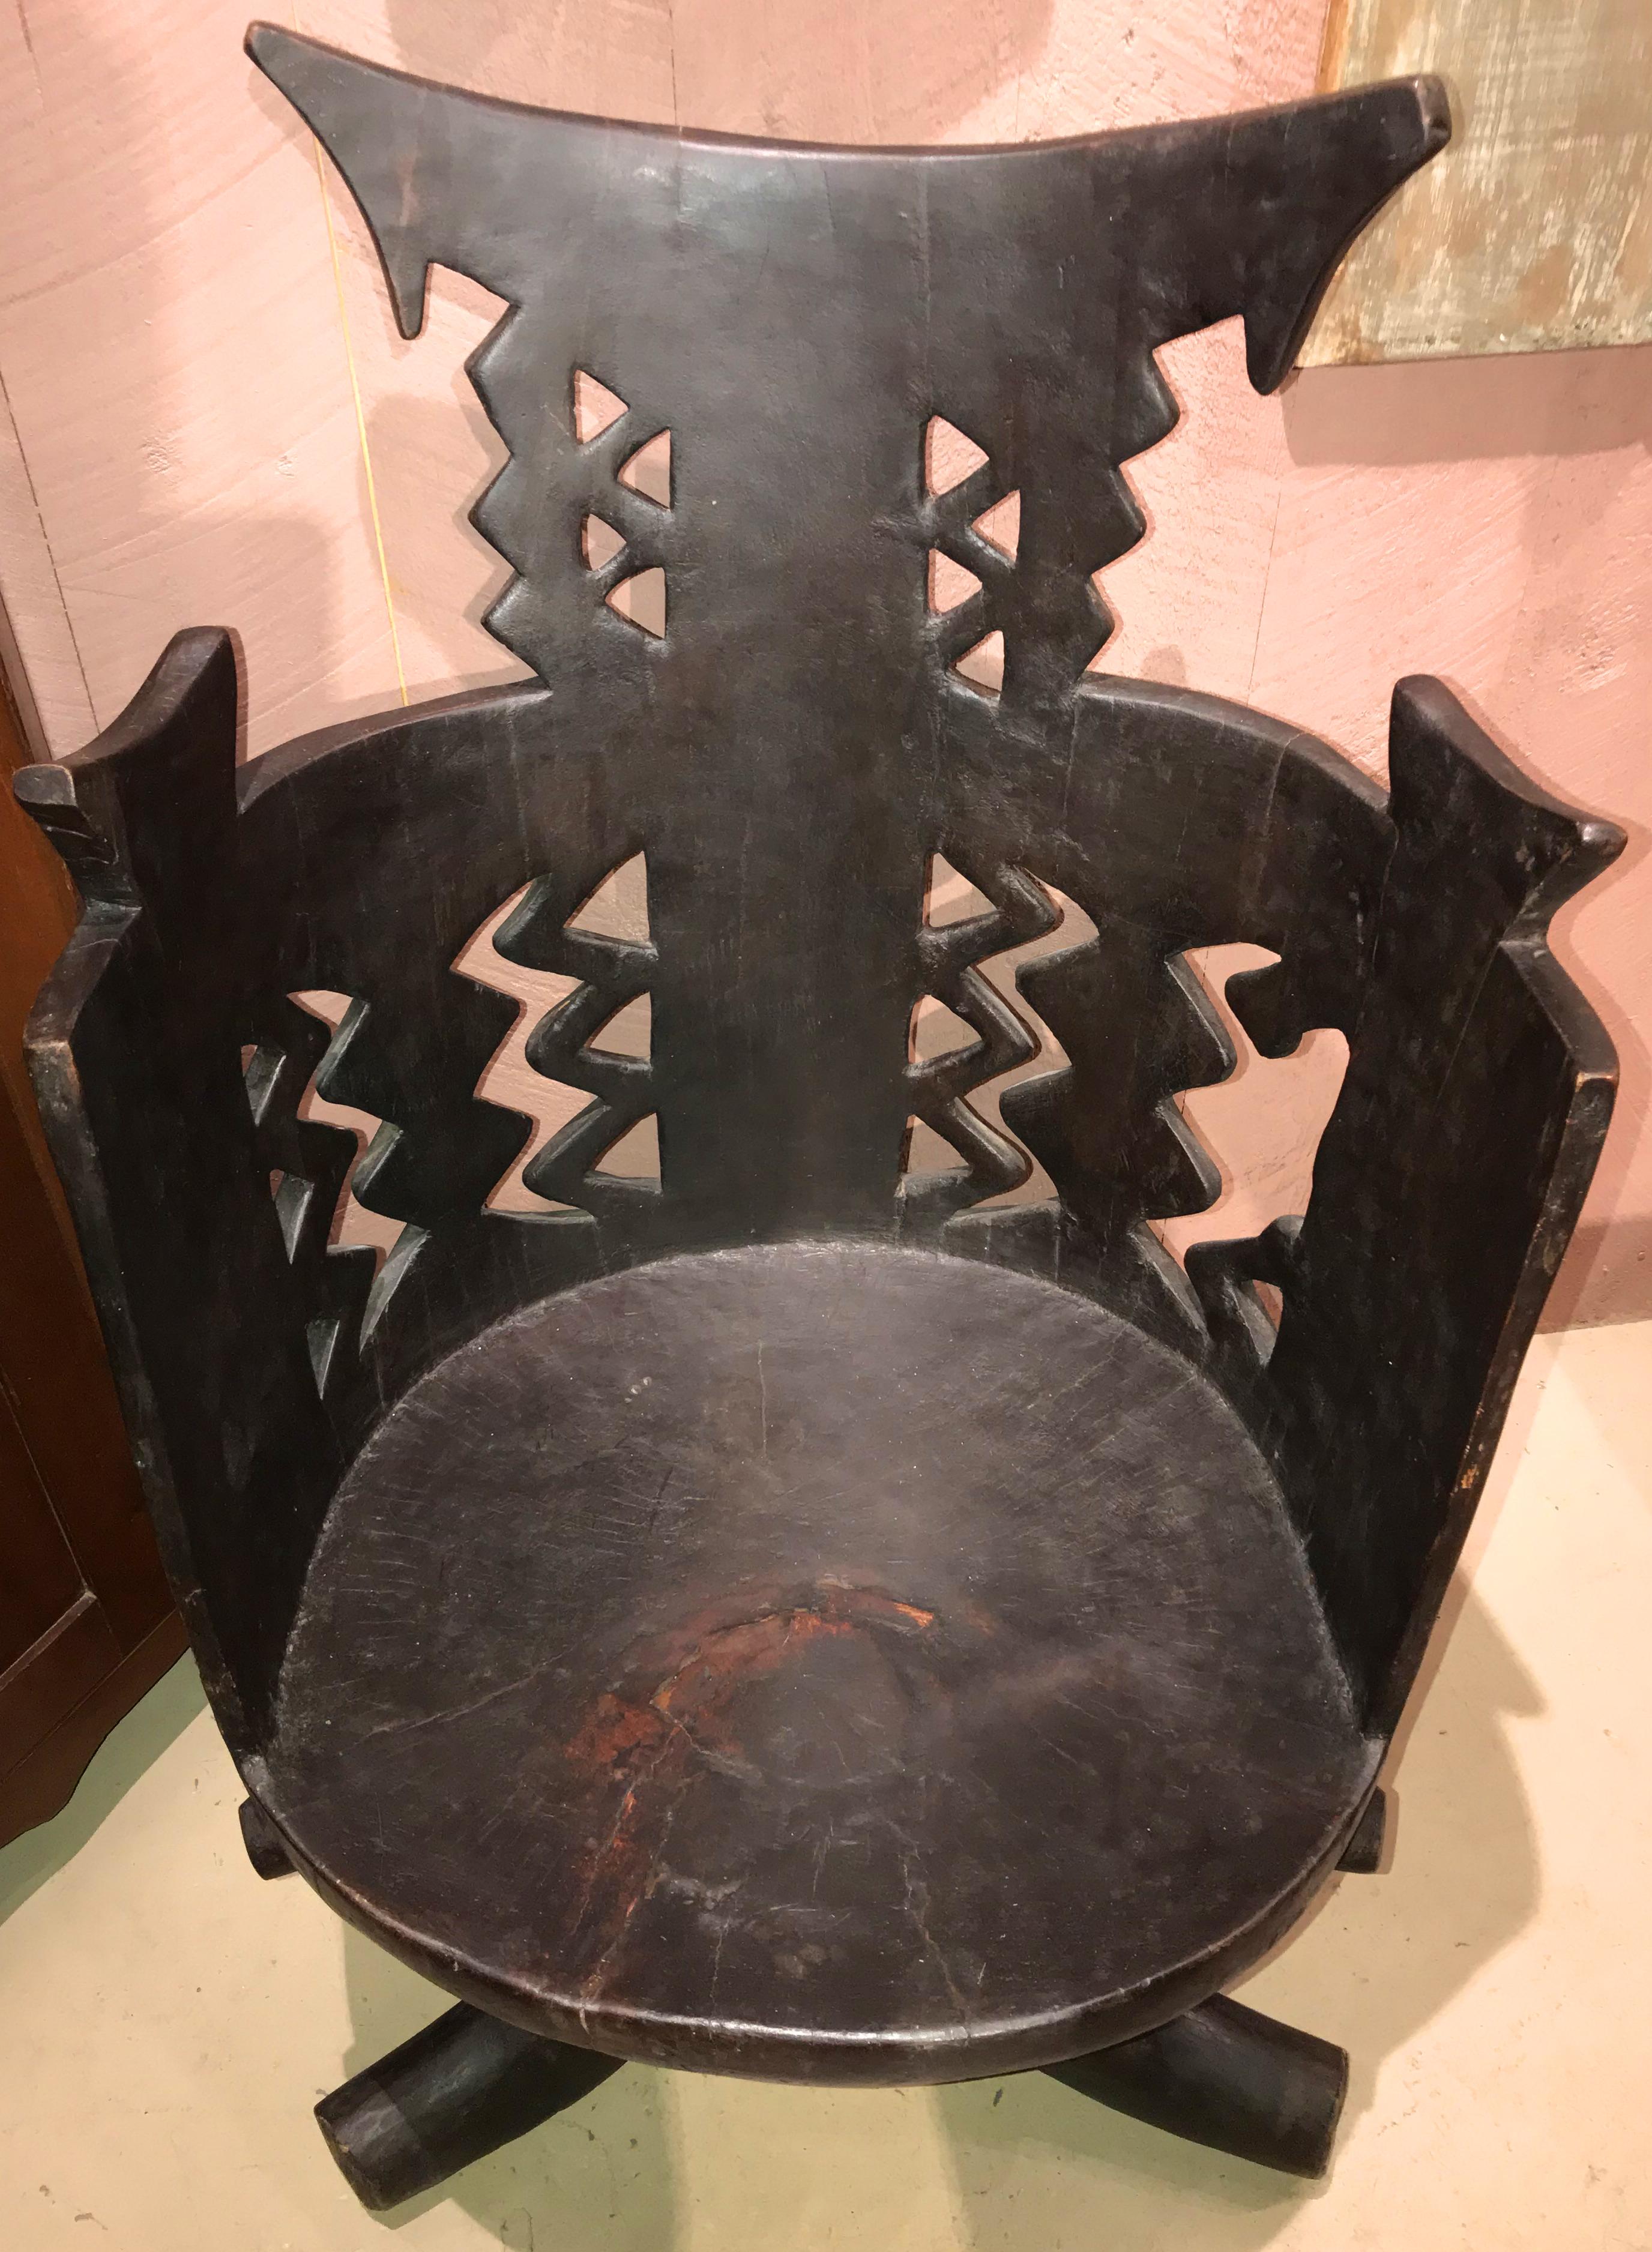 A wonderful hand-carved Jimma chair with tripod legs from a single piece of dense wanza wood, probably made by the Gurage people of Southwest Ethiopia in Africa. Probably dates to the 19th or early 20th century in very good overall condition, with